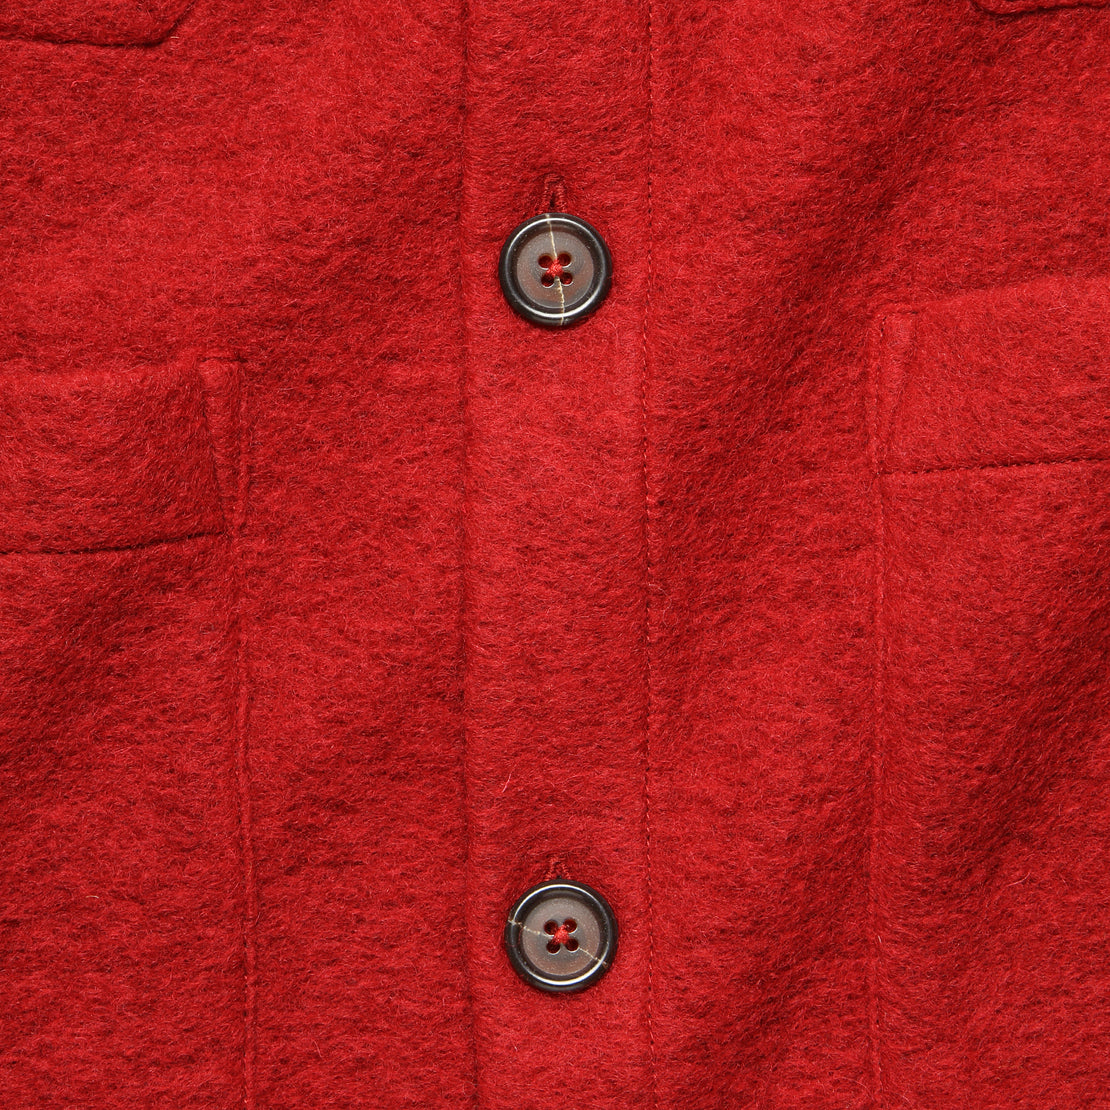 Wool Fleece Cardigan - Red - Universal Works - STAG Provisions - Tops - Sweater